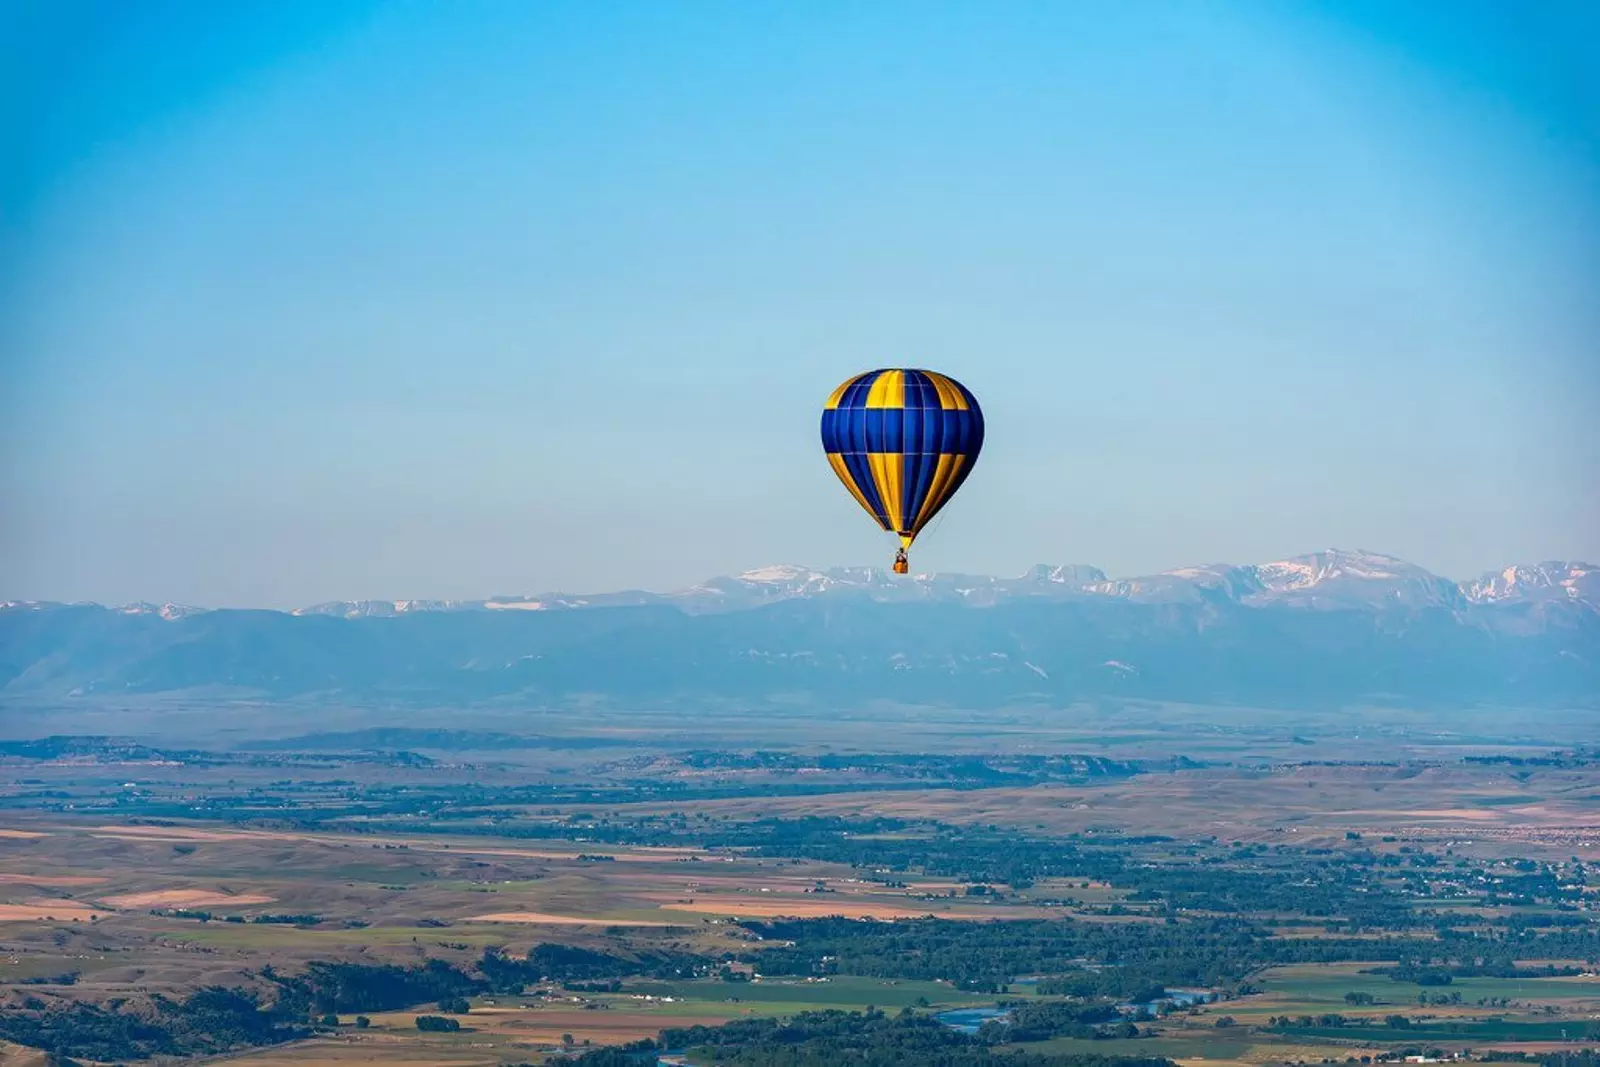 Billings to Host Montana's Only Hot Air Balloon Fest in July